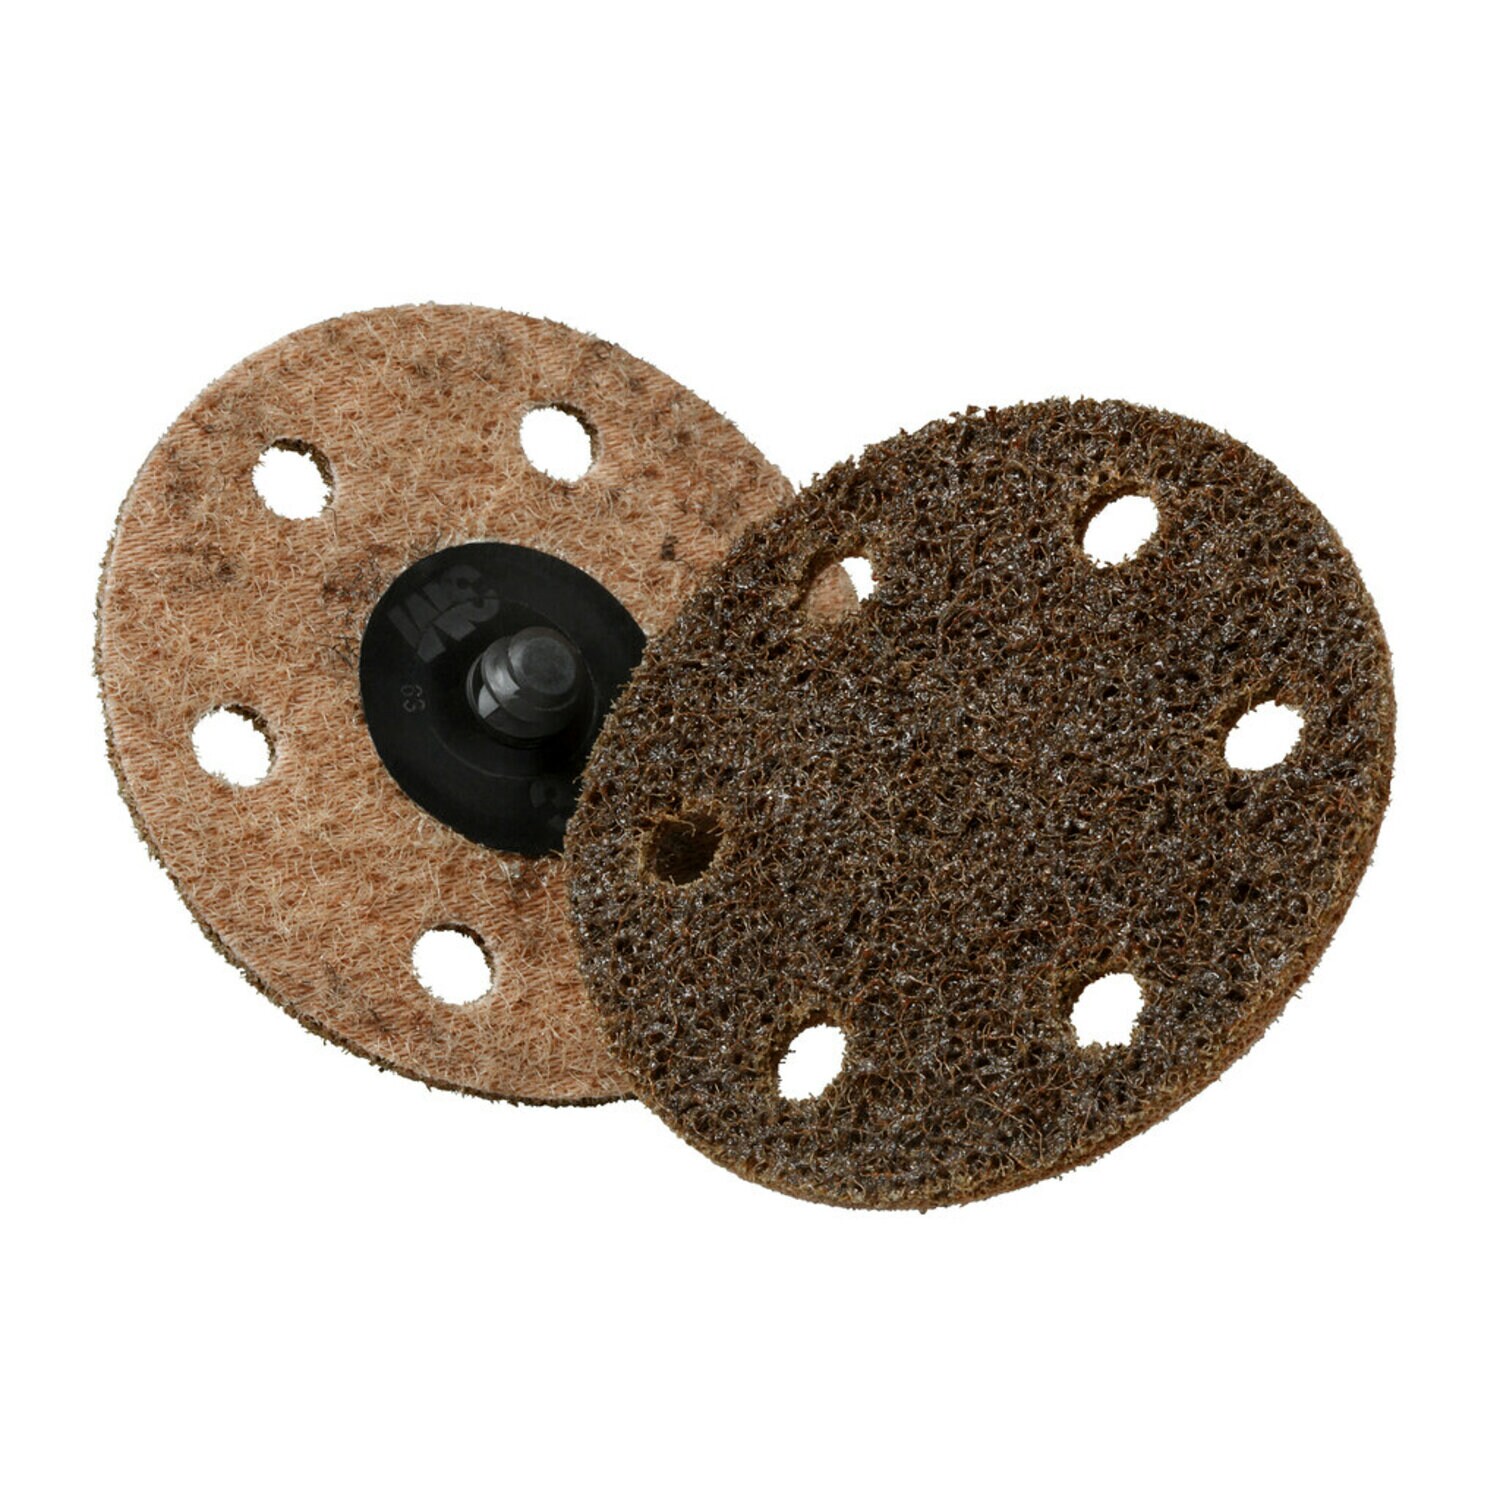 7220-01-658-7602) PEEL-AND-STICK NONSKID, COARSE MATERIAL